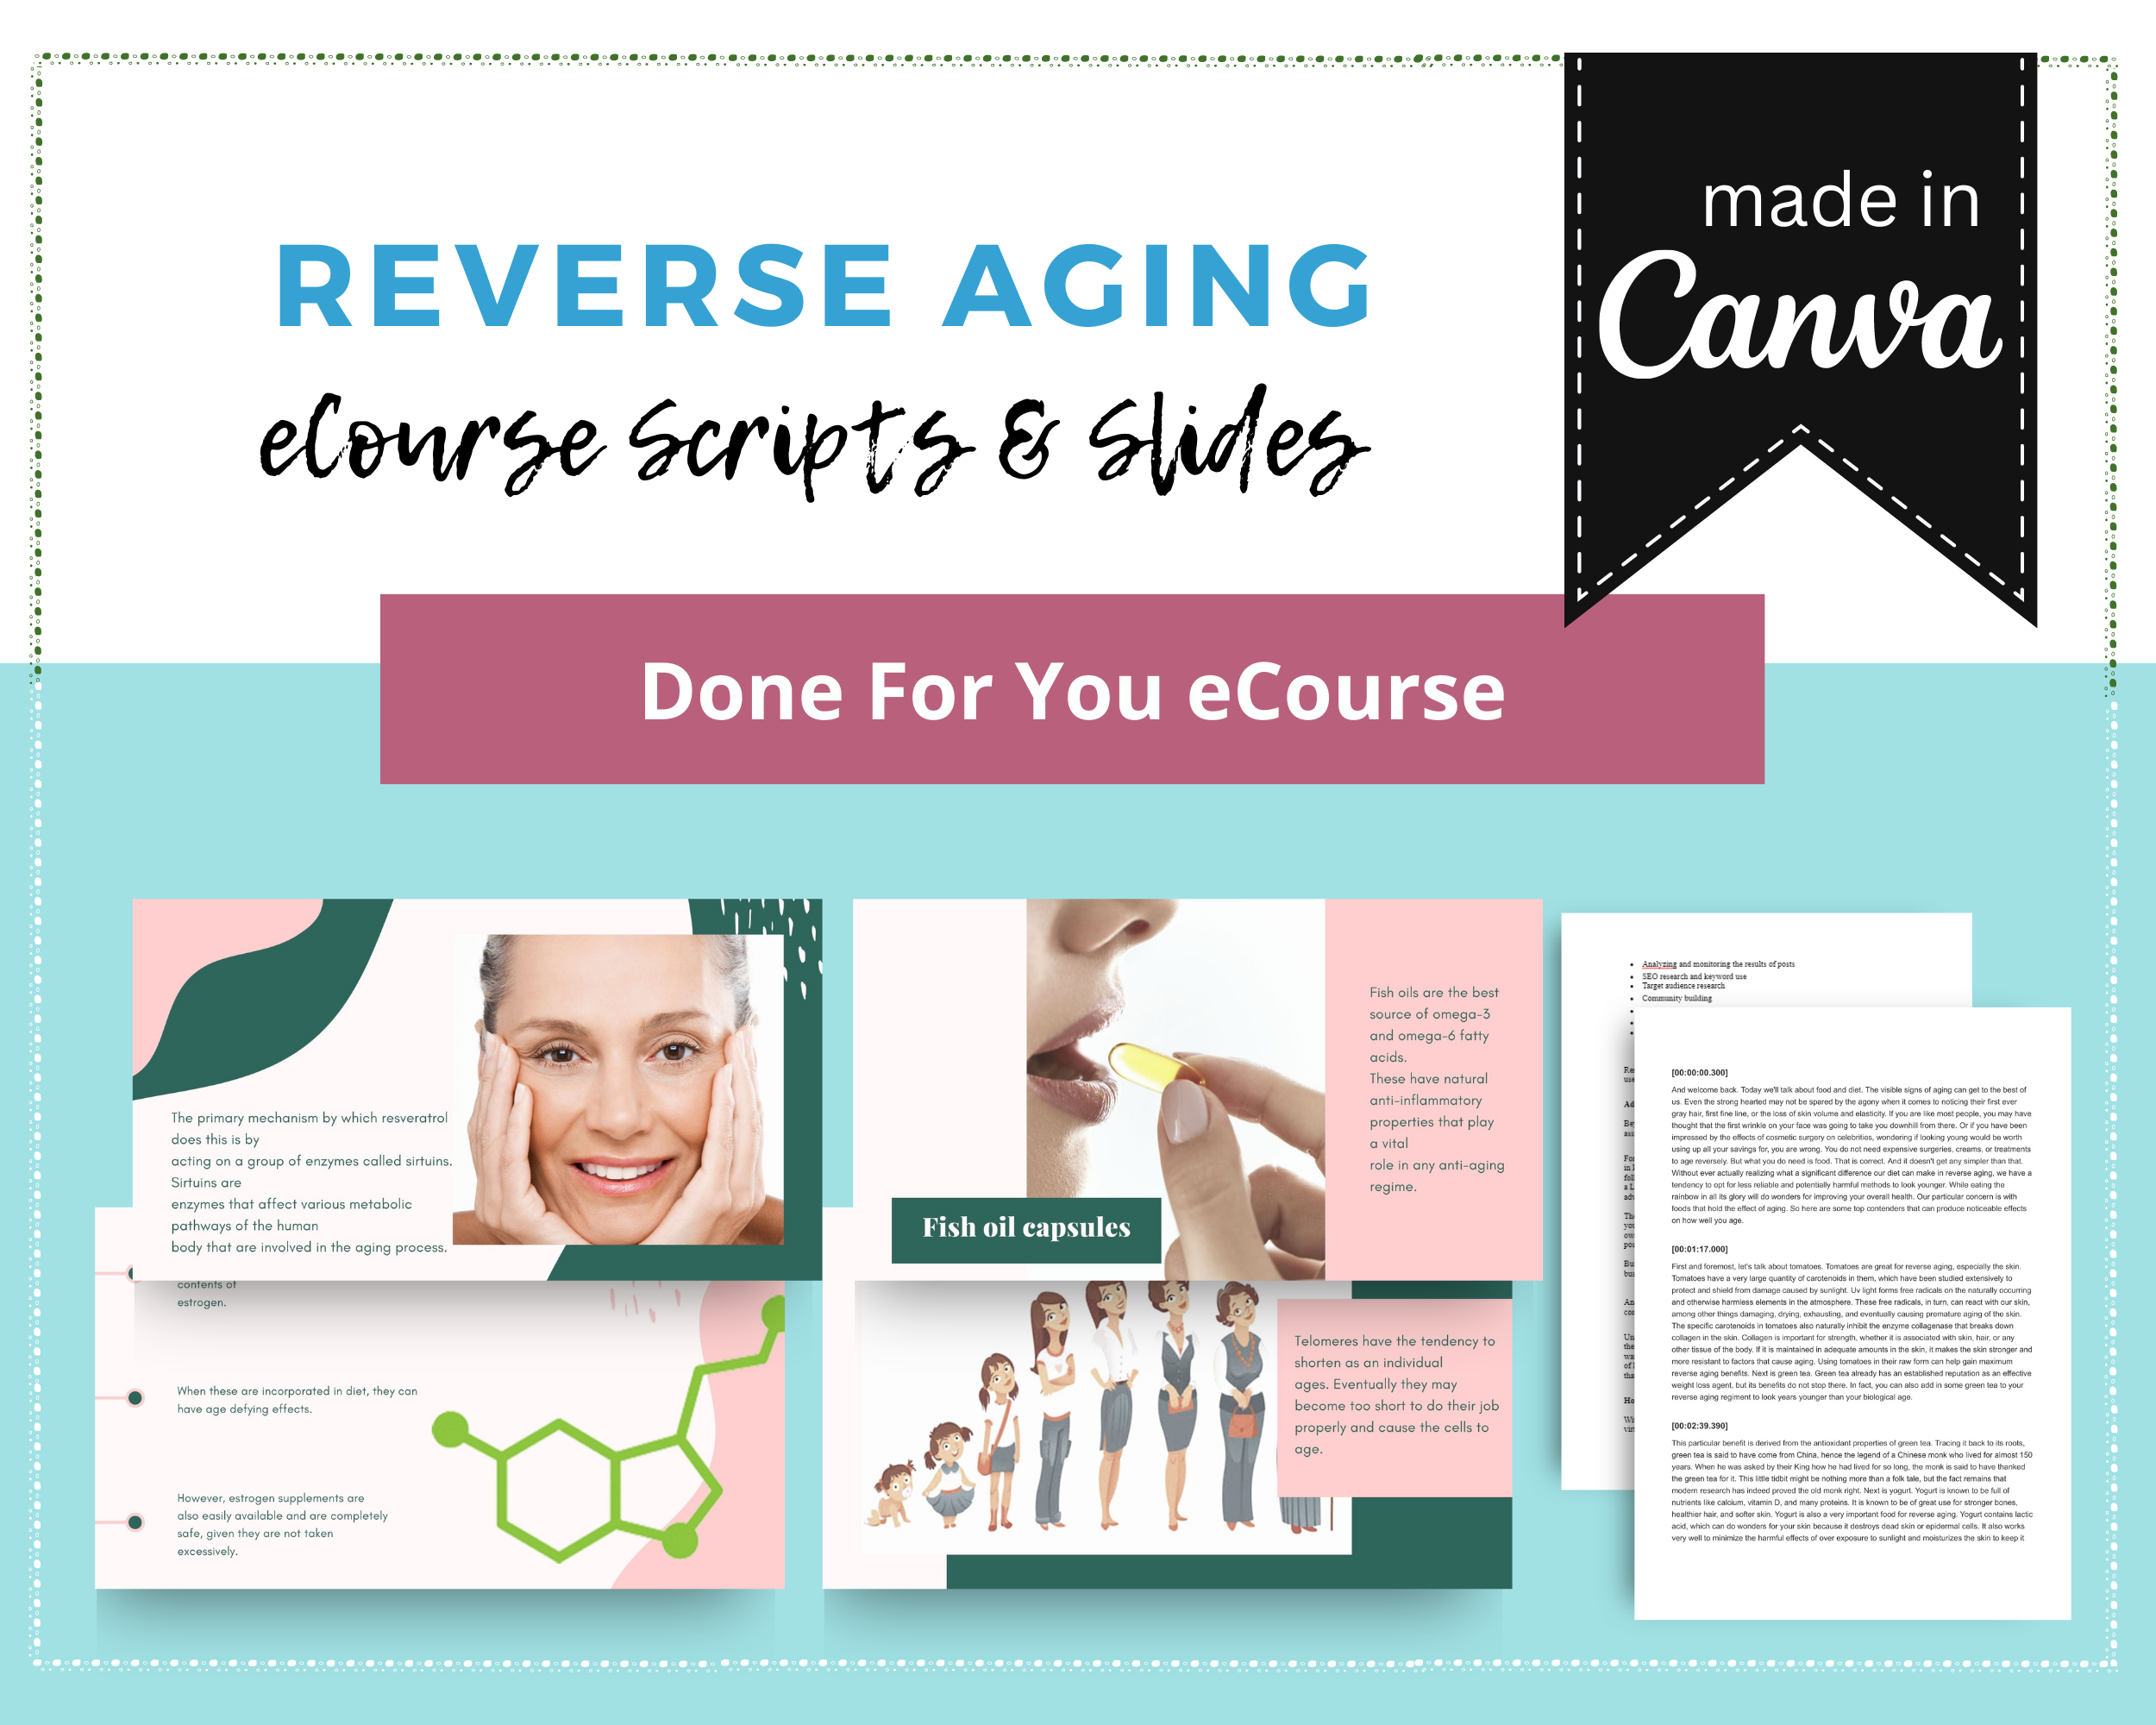 Reverse Aging | Done for You Online Course |  Wellness Course in a Box | 10 Lessons